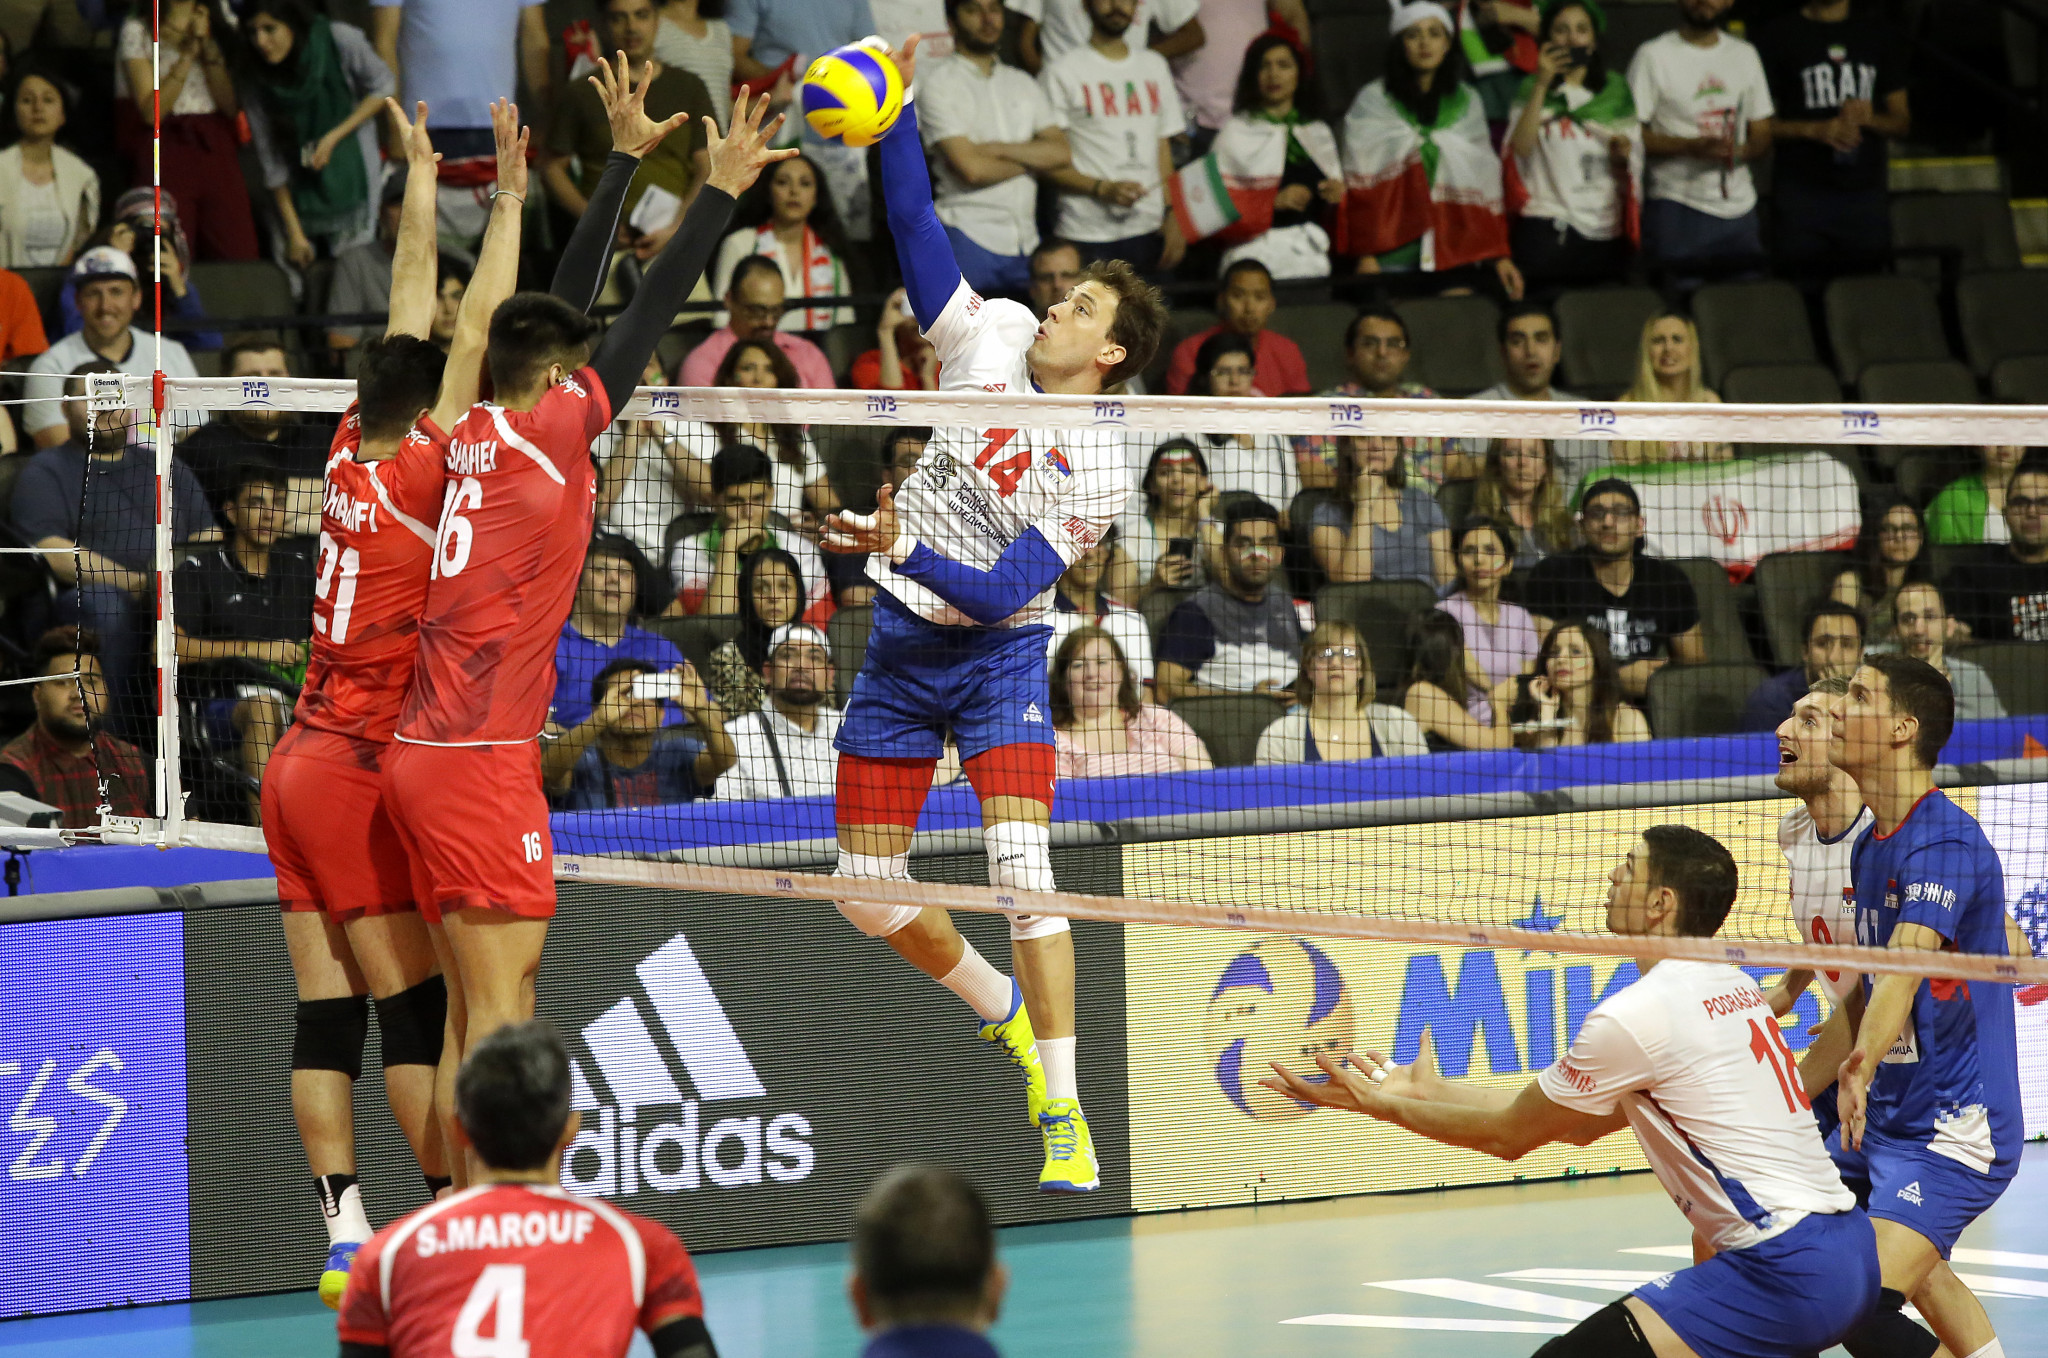 Serbia's Aleksandar Atanasijevic is the only player at the FIVB Nations League Finals to have already scored over 30 points in a single game ©FIVB